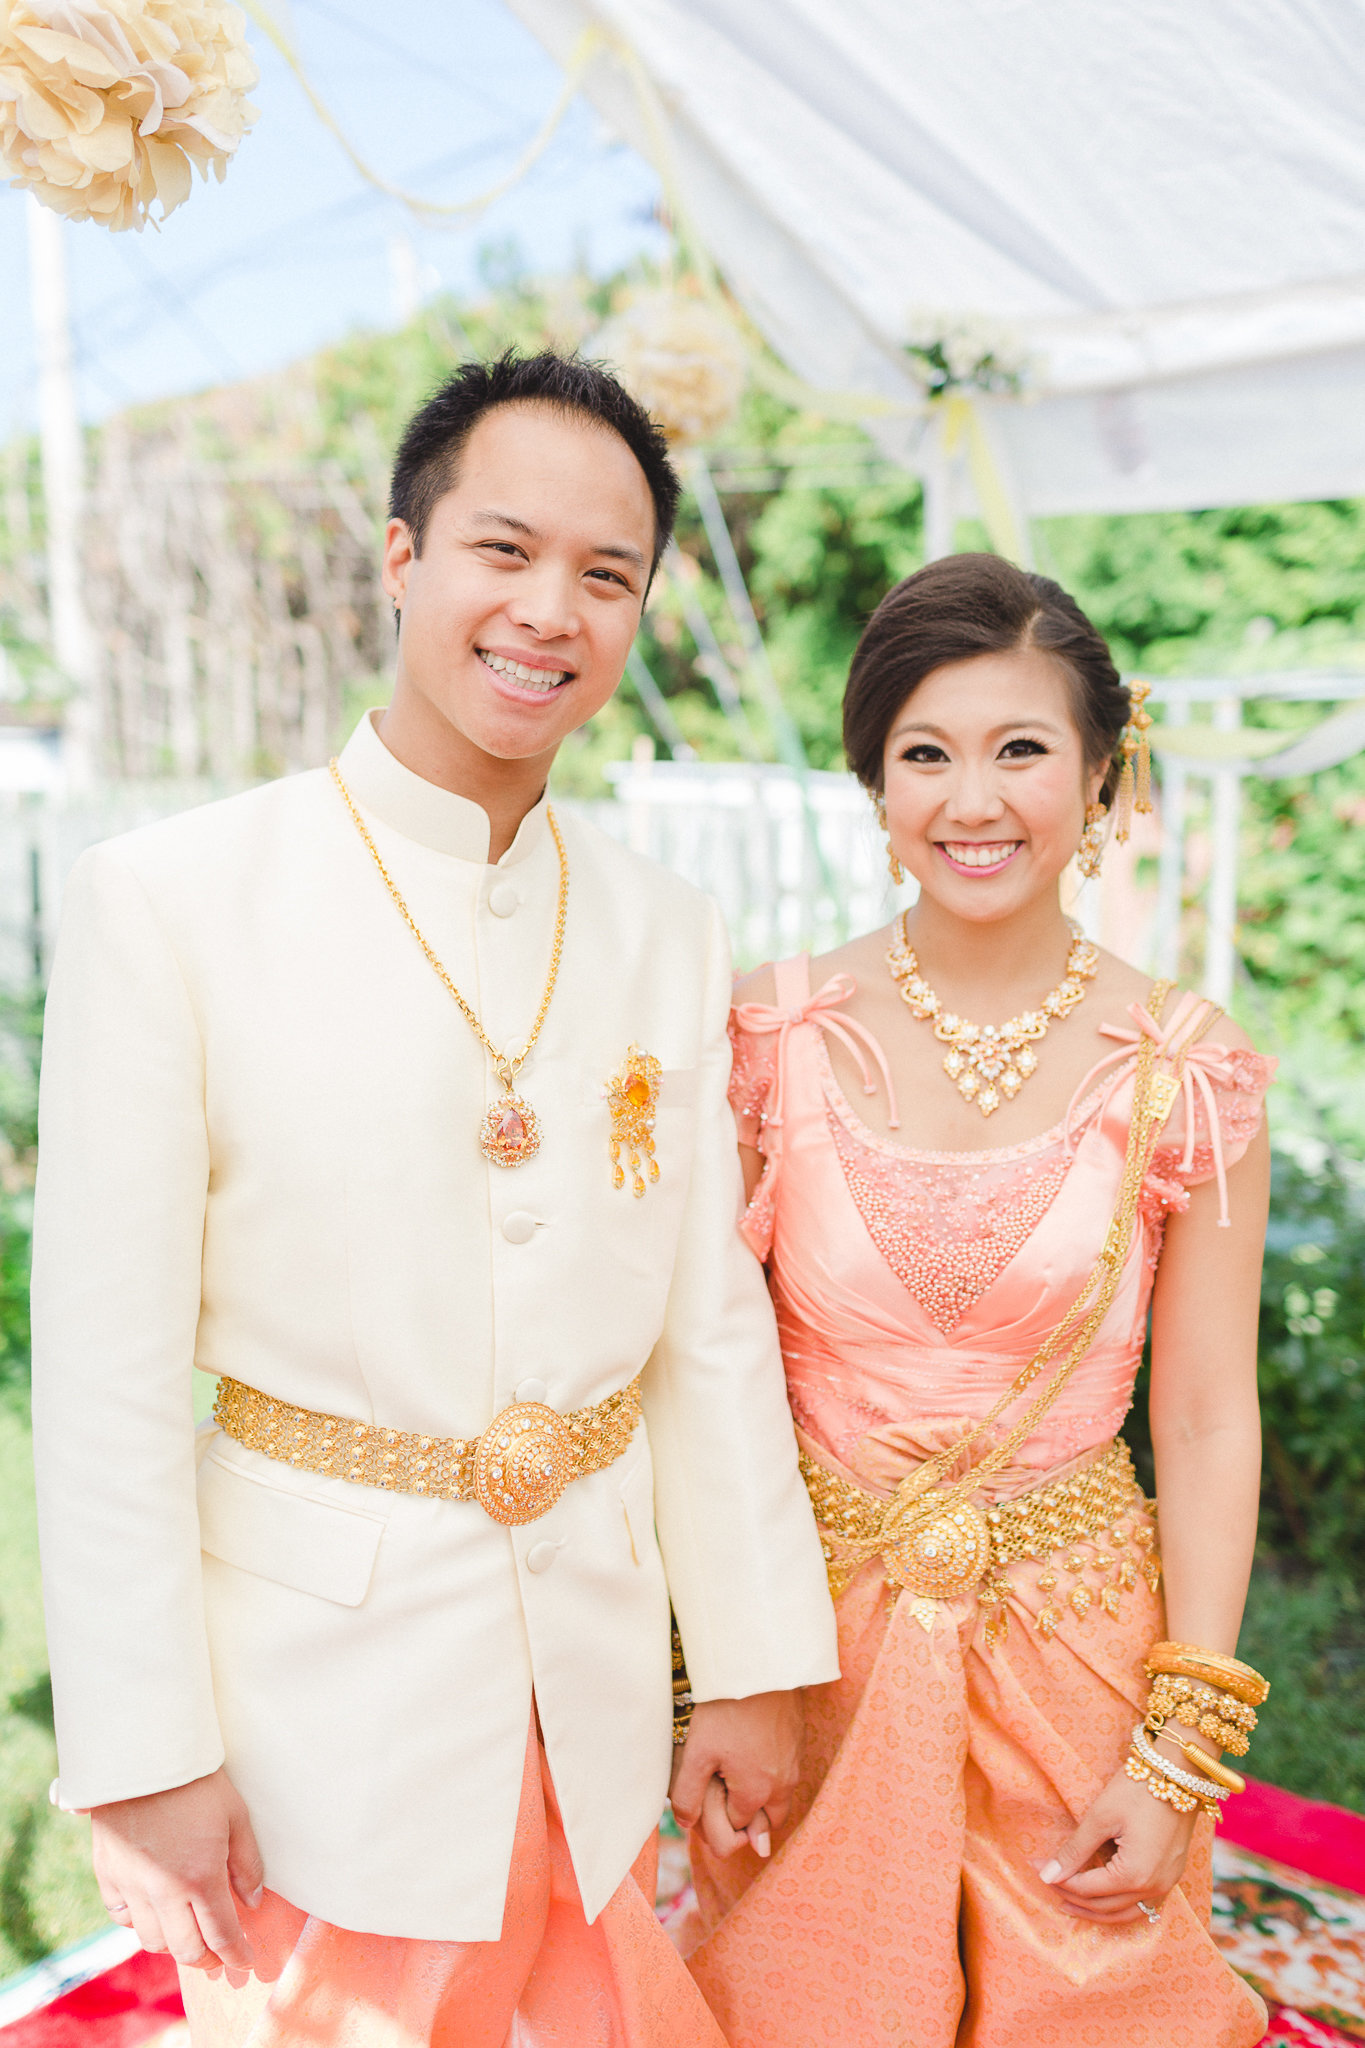 photographe-montreal-mariage-culturel-traditionnel-cambodgien-lisa-renault-photographie-traditional-cultural-cambodian-wedding-39